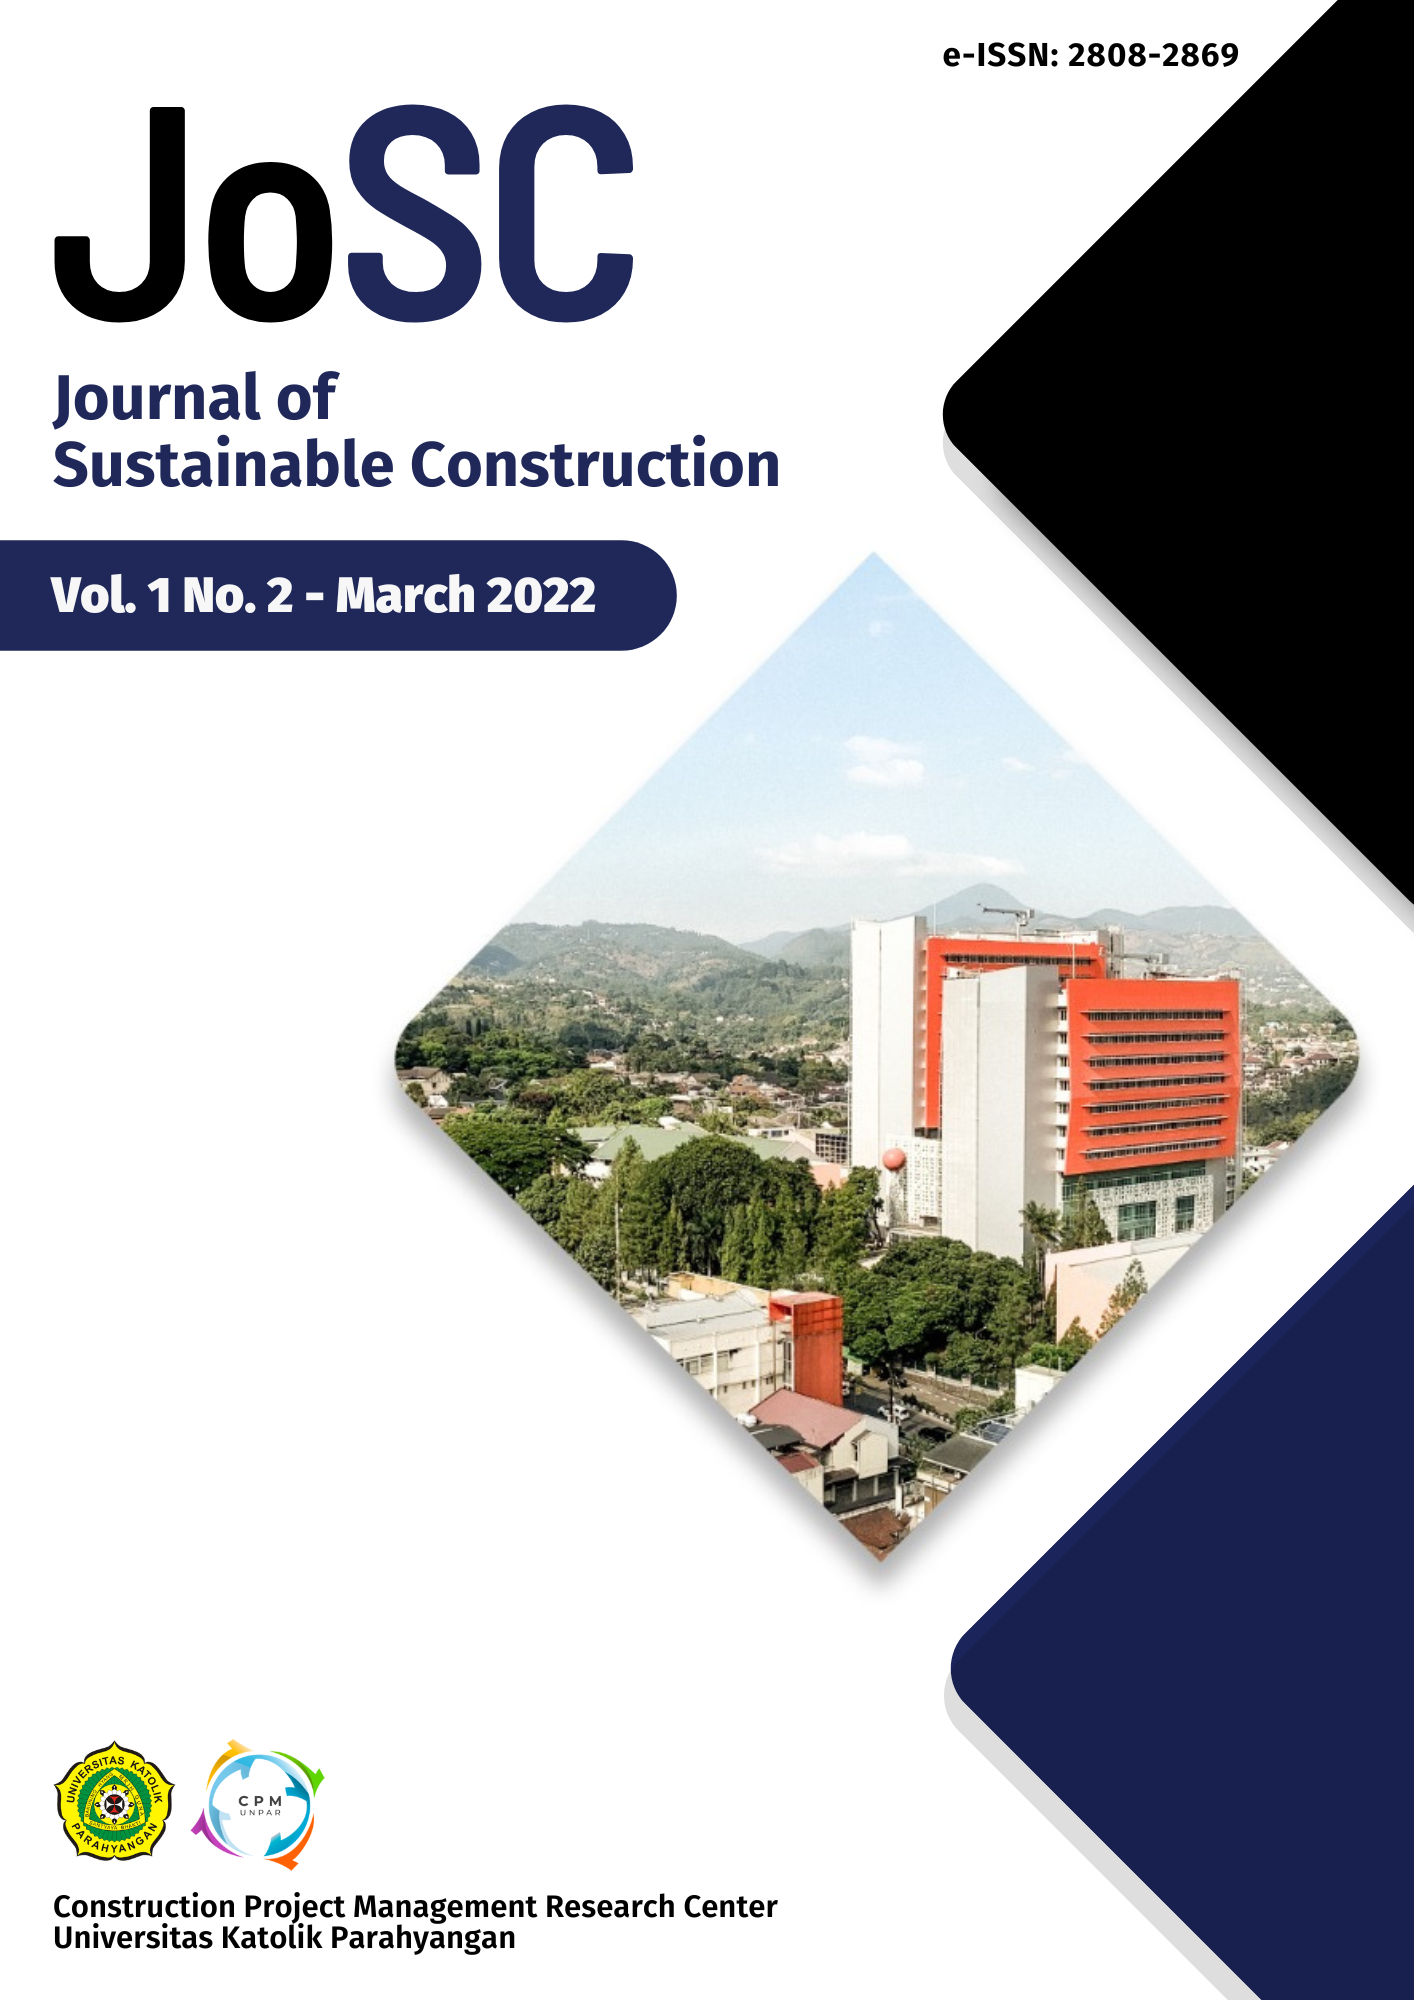 					Lihat Vol 1 No 2 (2022): Journal of Sustainable Construction
				